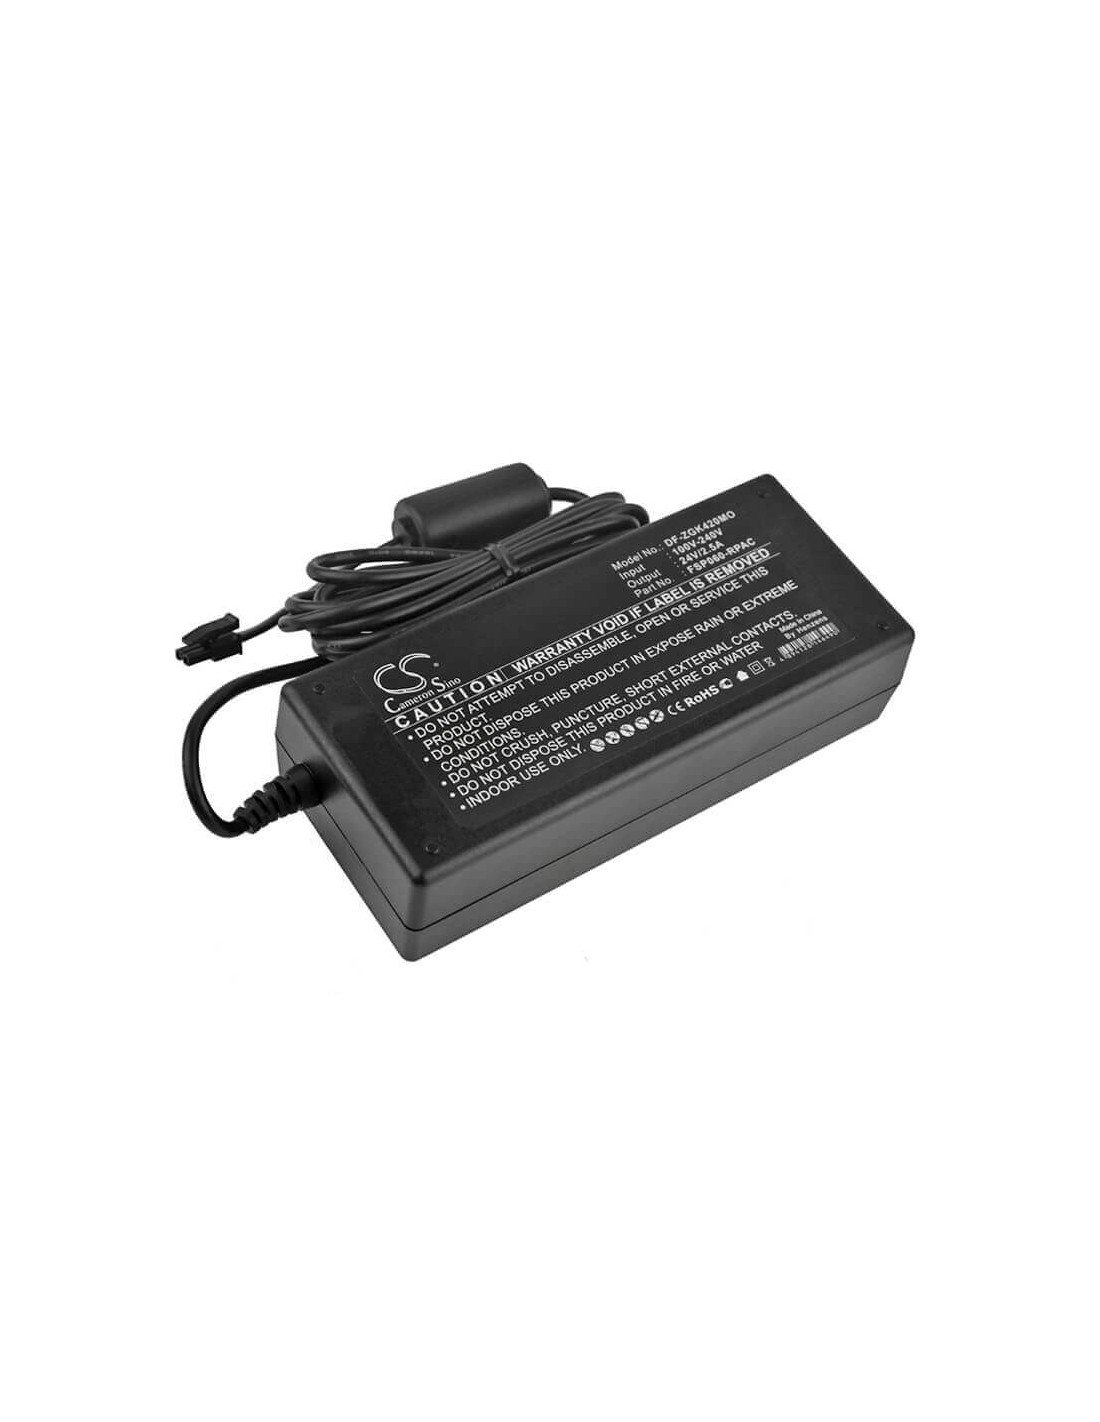 Battery Charger for Zebra, Fsp060-rpac, Gk420, Gk420d